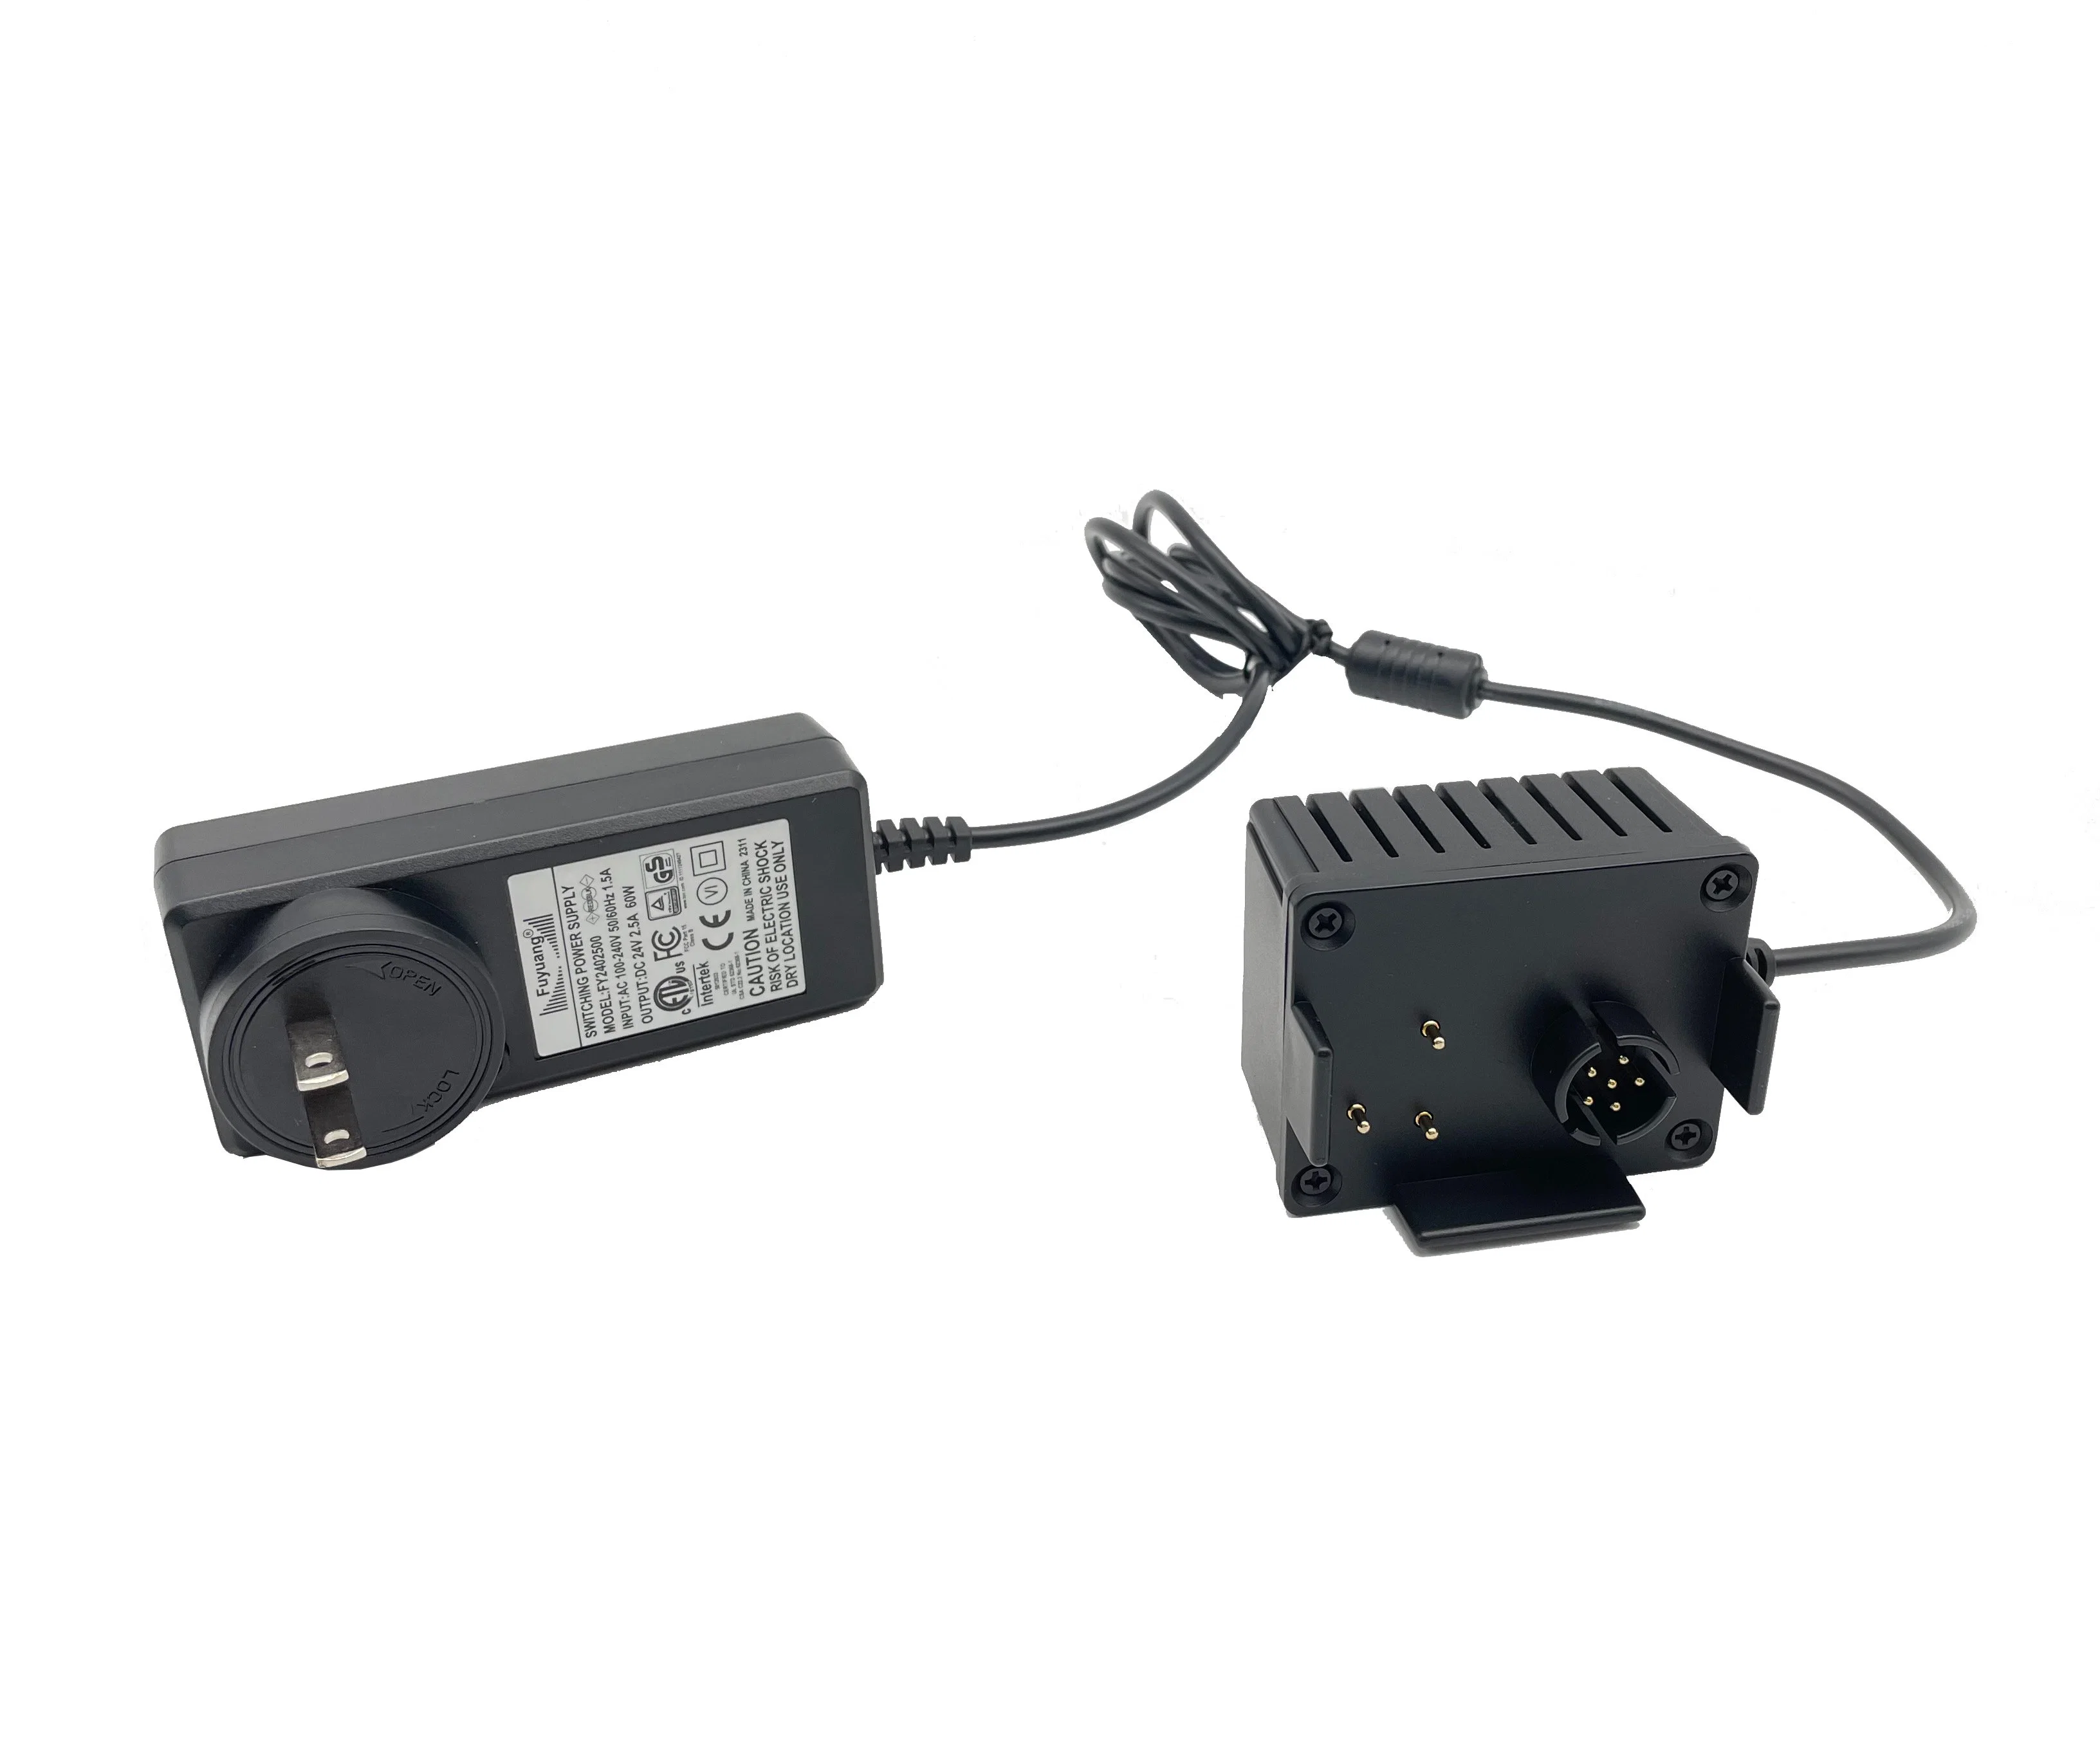 Rapid Single Charger for Bb-2590 Series Battery Pack for Robotics